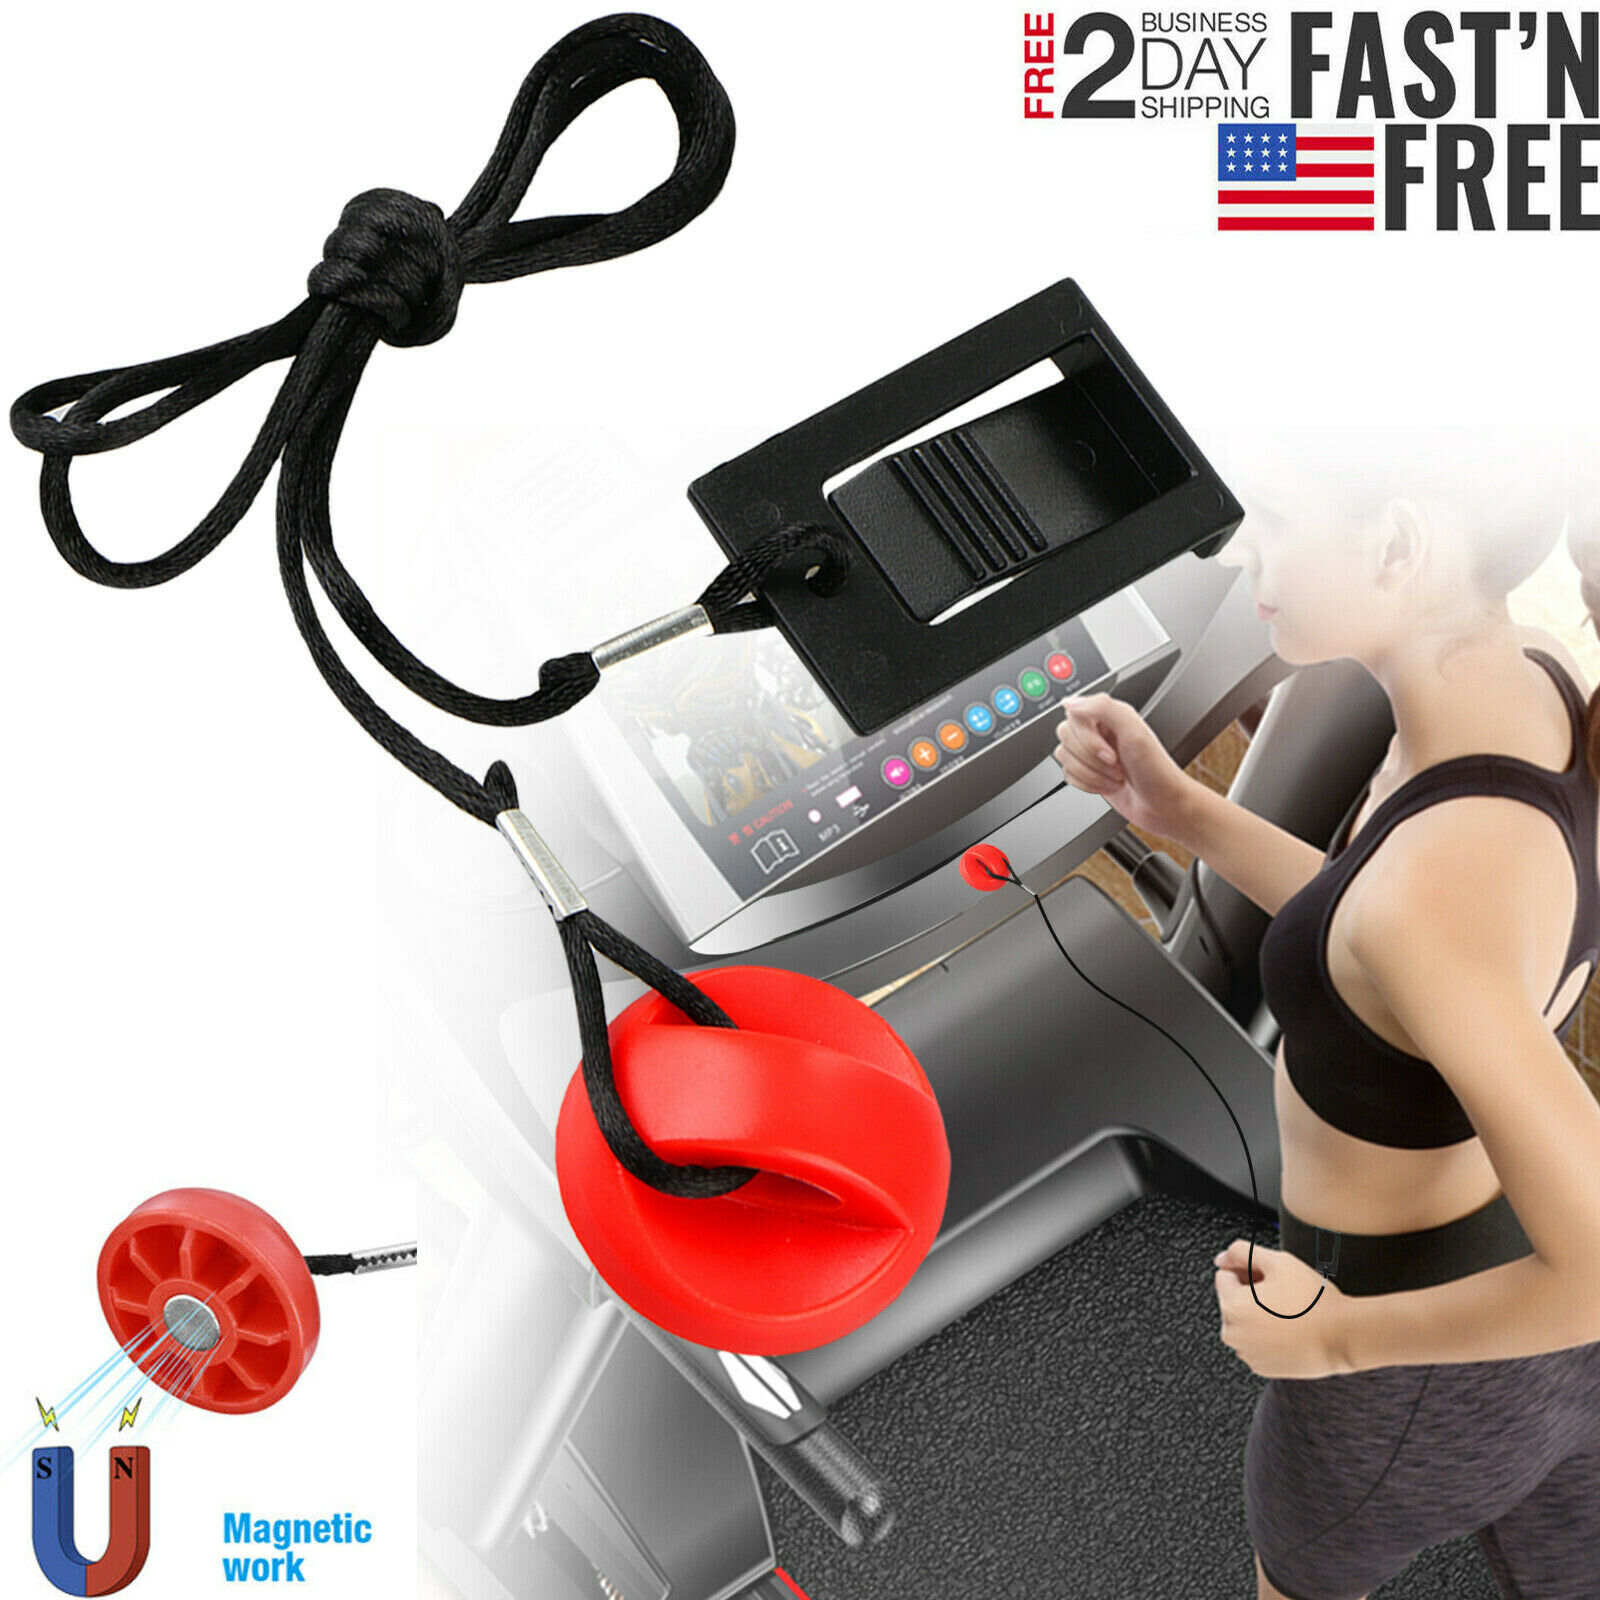 Universal Magnetic Treadmill Safety Key Security Lock Fit For Proform & Weslo Us